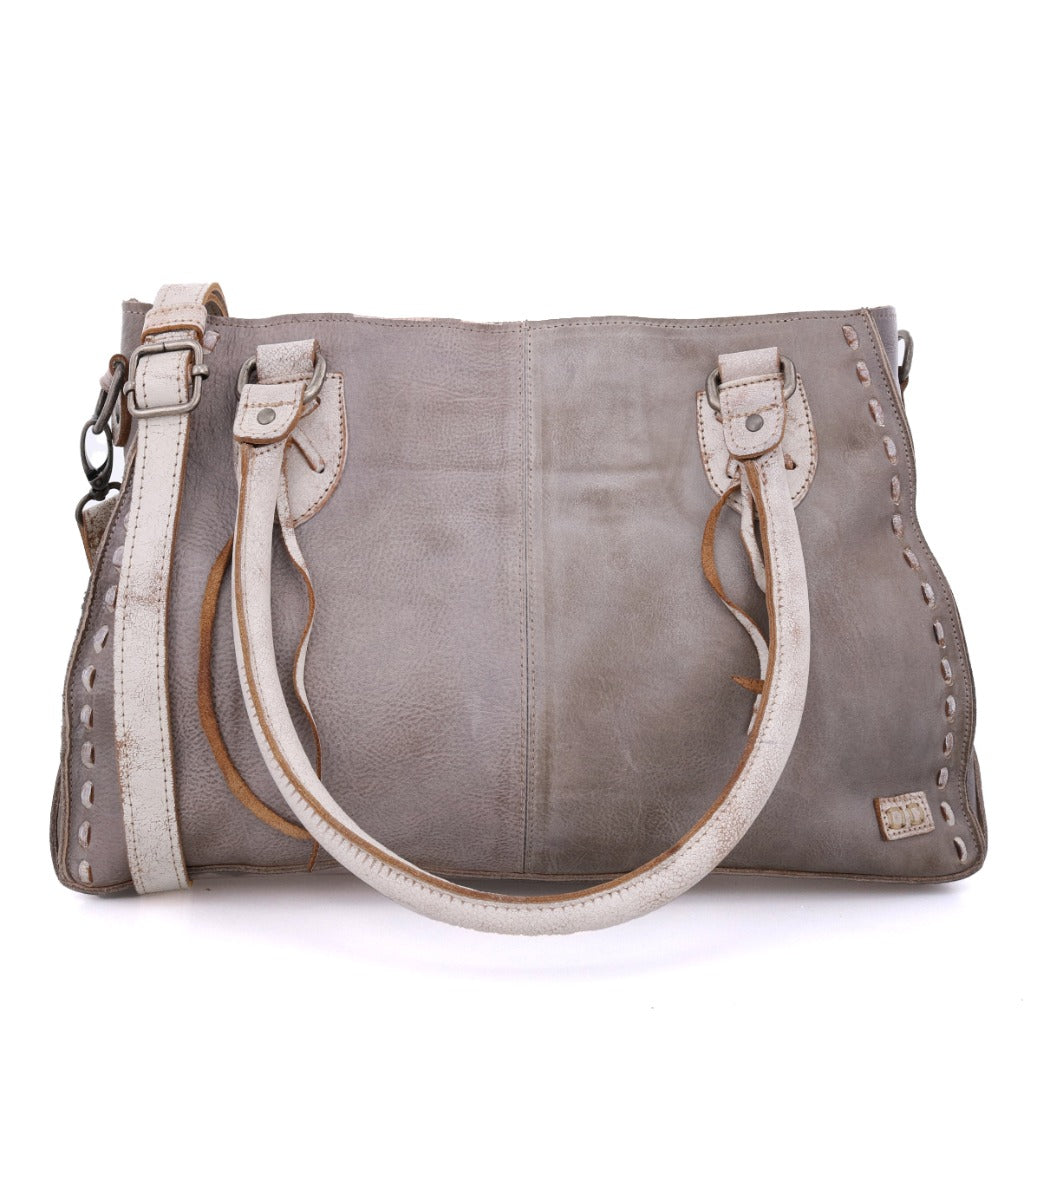 A Rockababy grey leather handbag with white straps by Bed Stu.